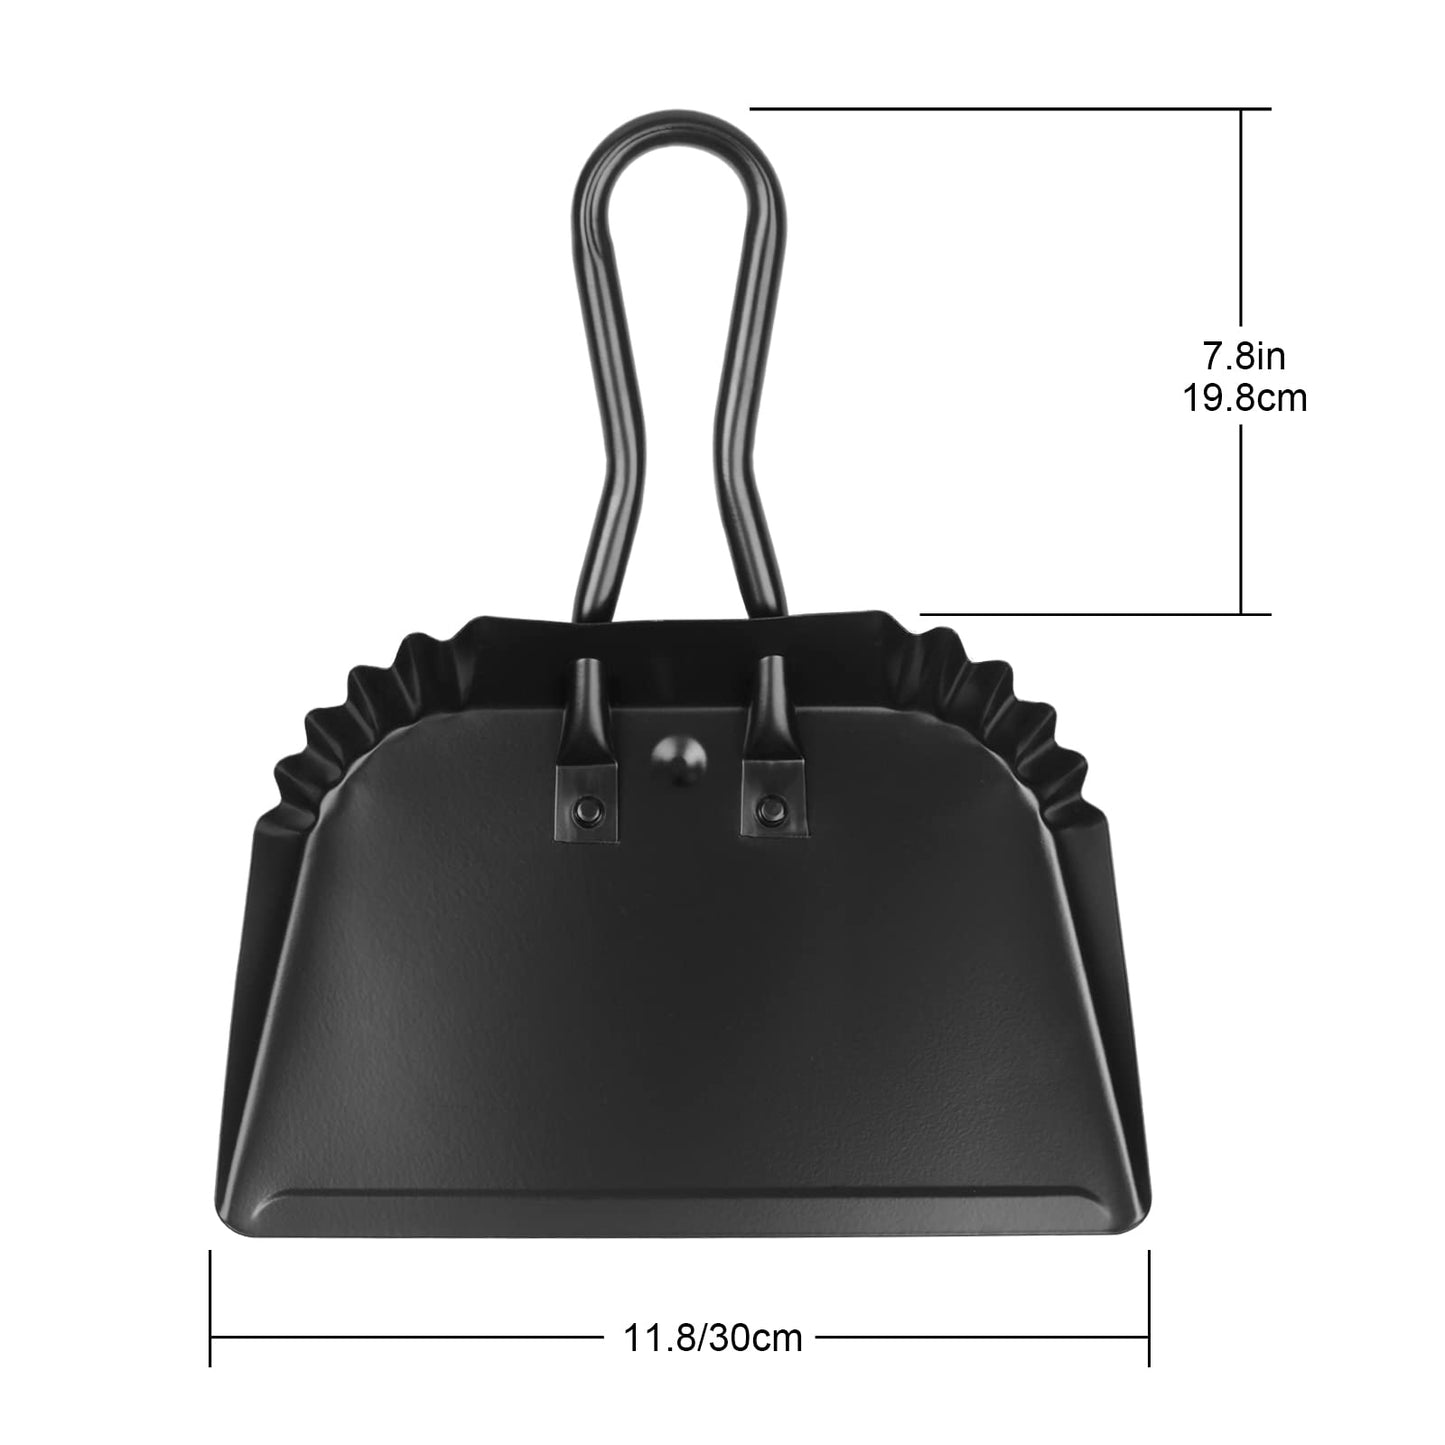 Heavy Duty Black Metal Dust Pan -Handheld Dustpan with Handle, Stainless Steel Large Dustpans with Wide Lip Industrial Dust Pans Precision Edge Small